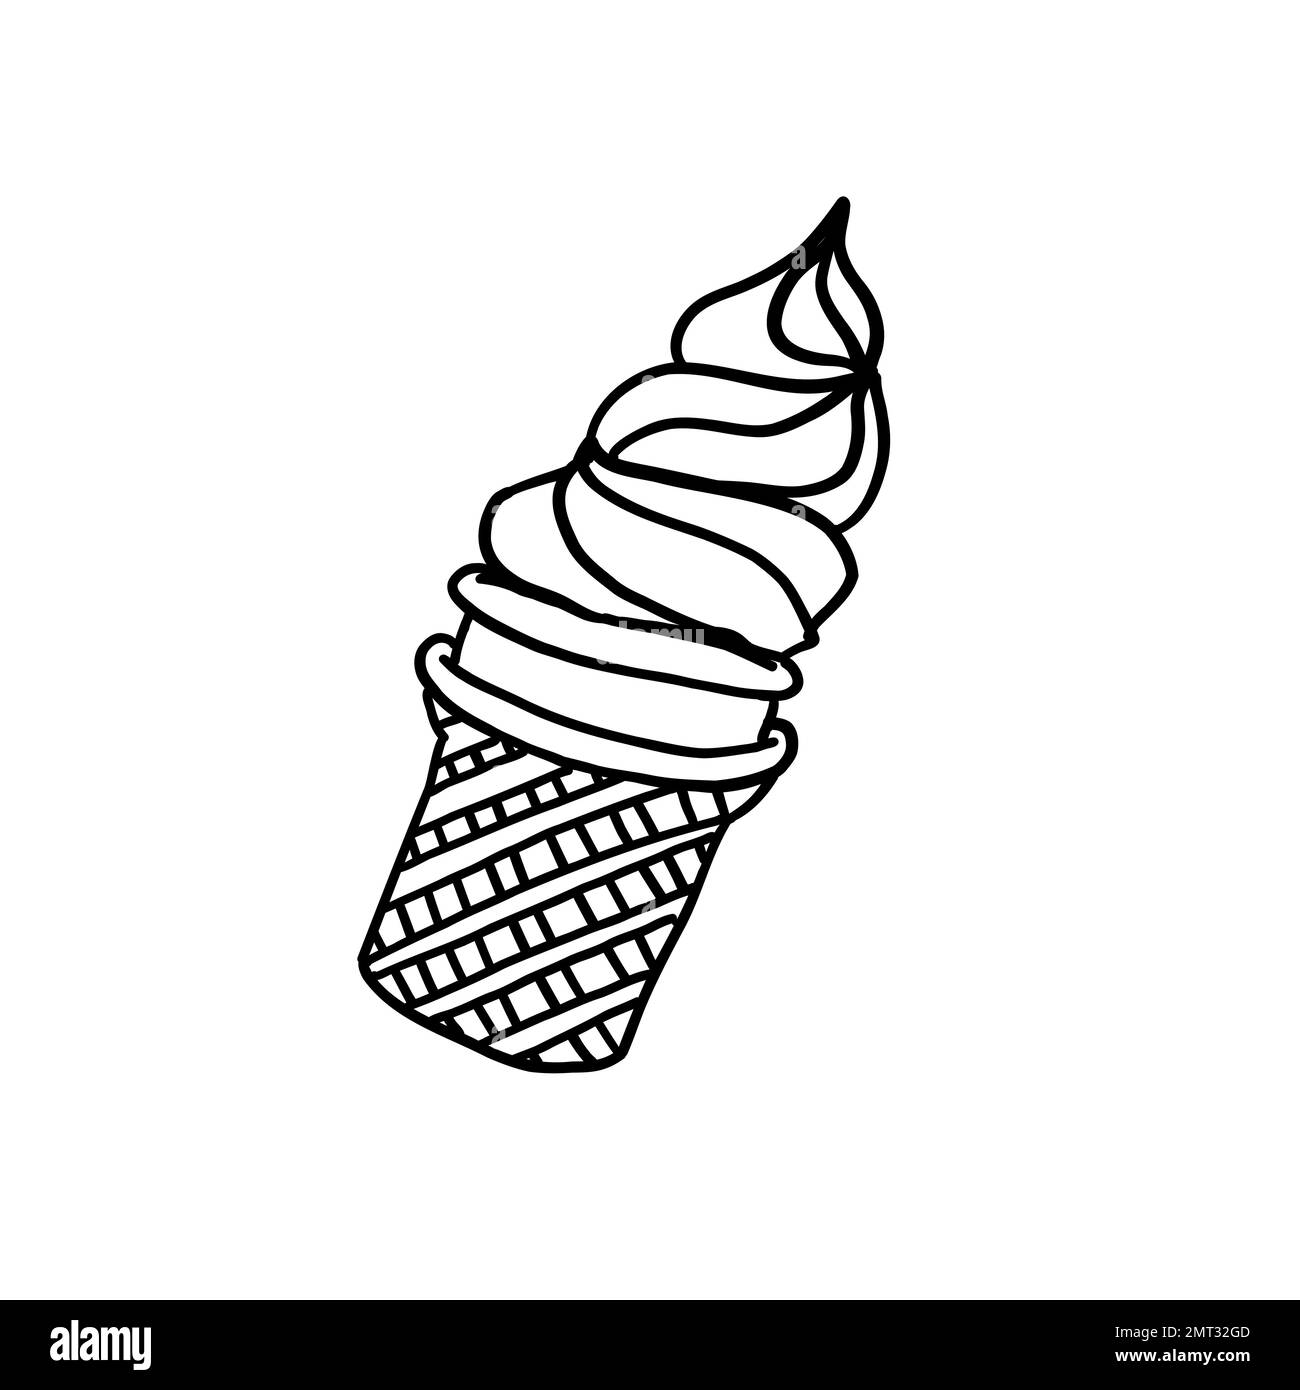 Vanilla ice cream. Vector illustration in outline doodle style isolated on white background. Stock Vector